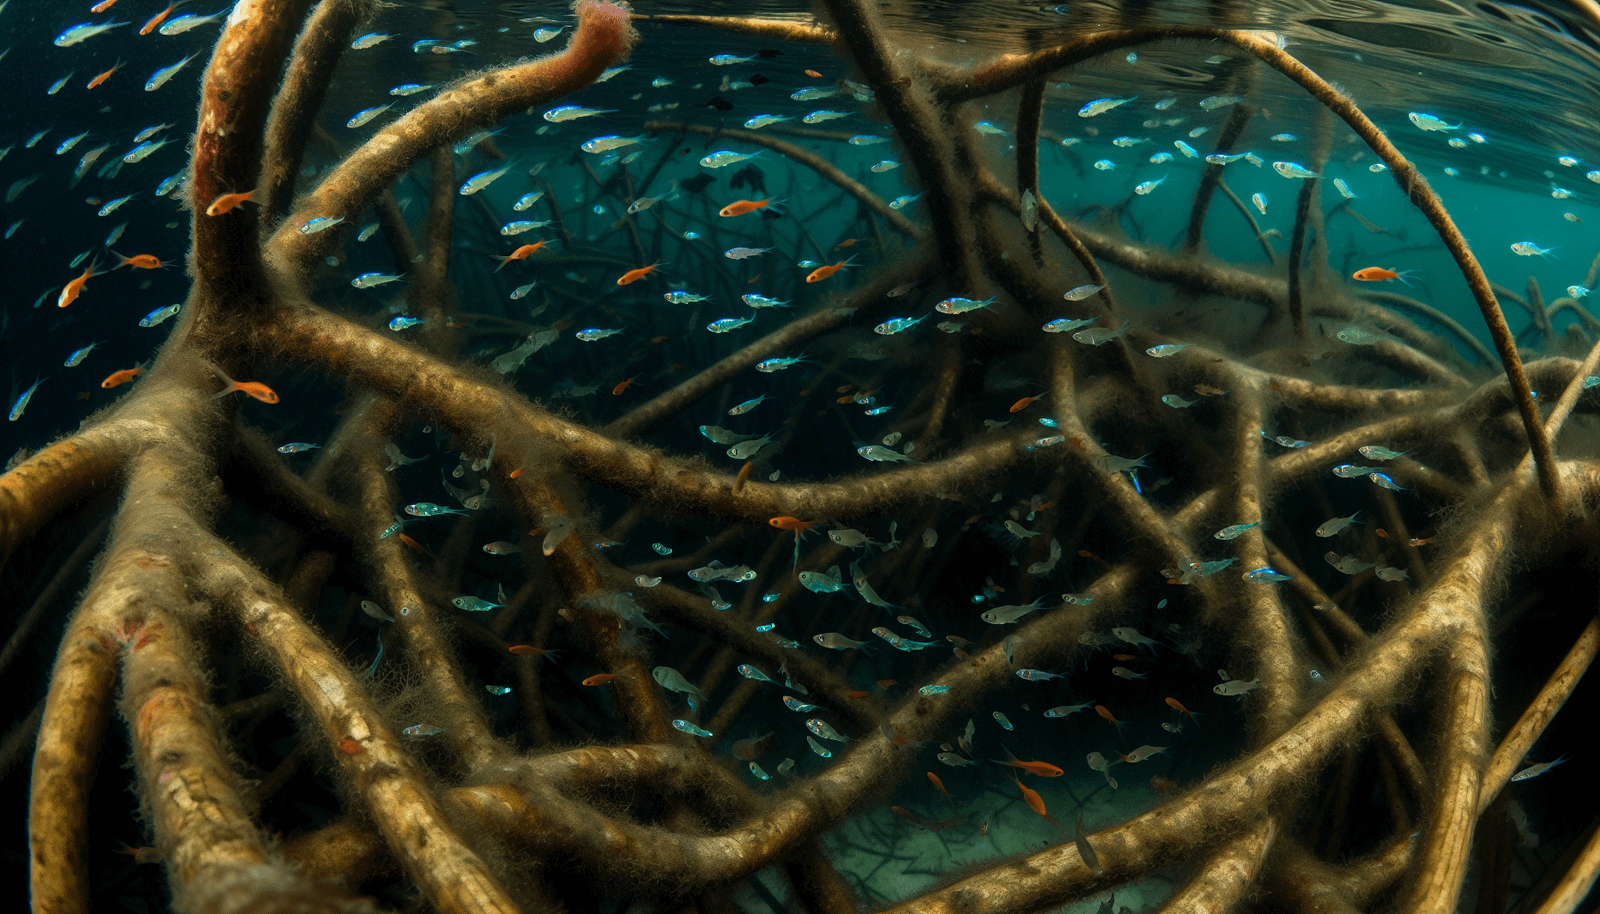 Underwater view of juvenile fish swimming among mangrove roots